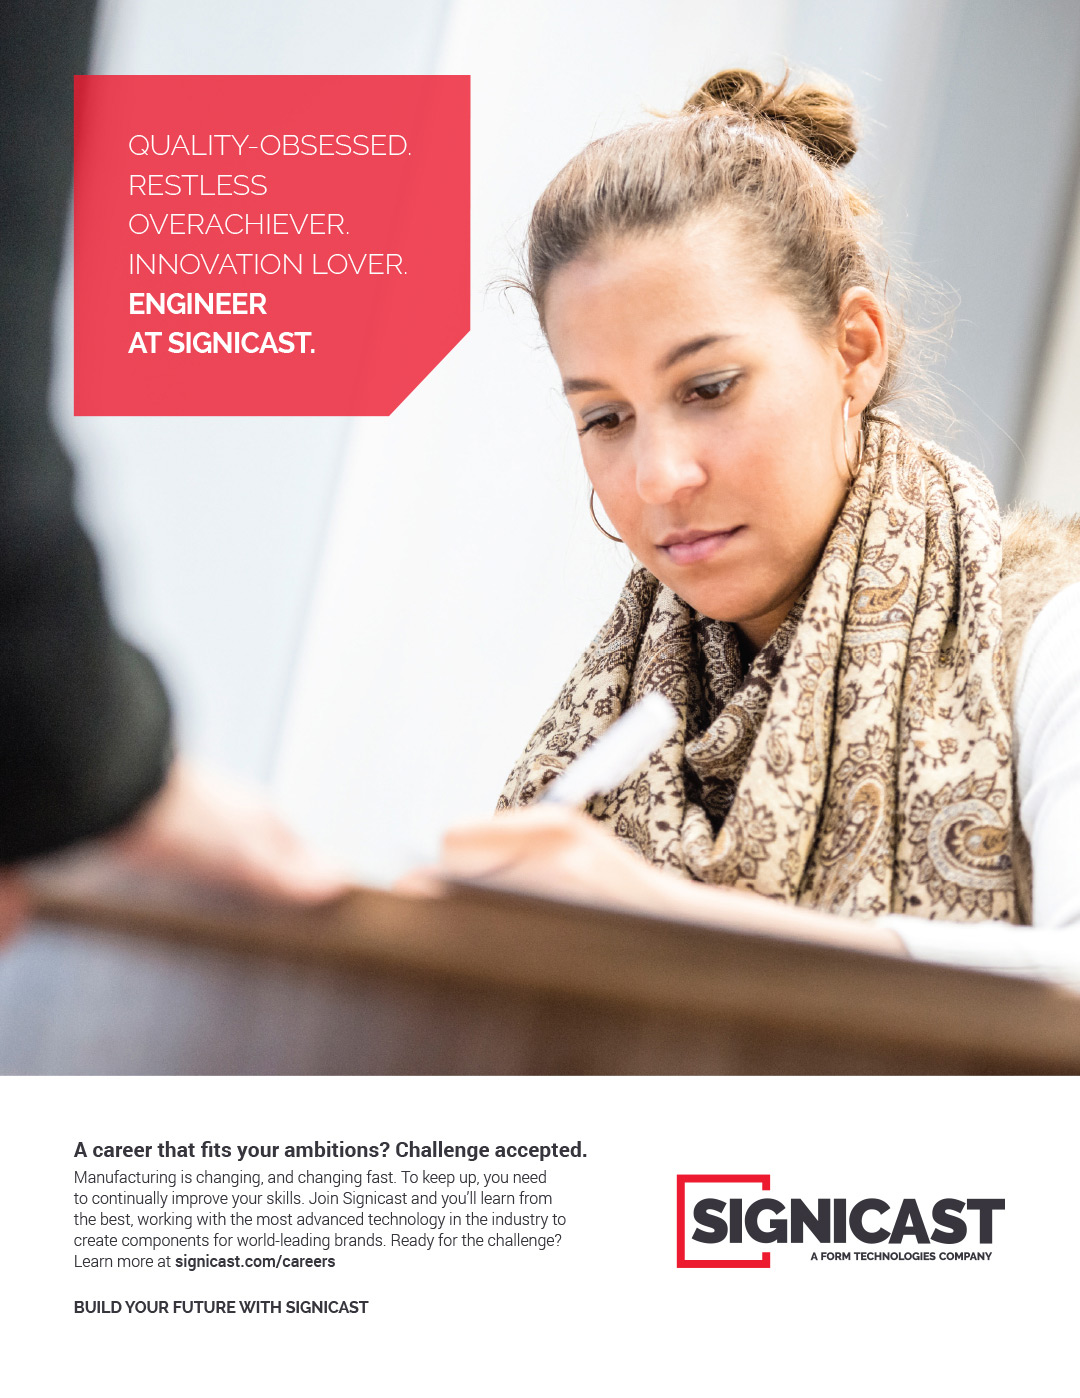 SIGNICAST_FLEXIBLE_LIFE_CAMPAIGN_FP_ADS-6